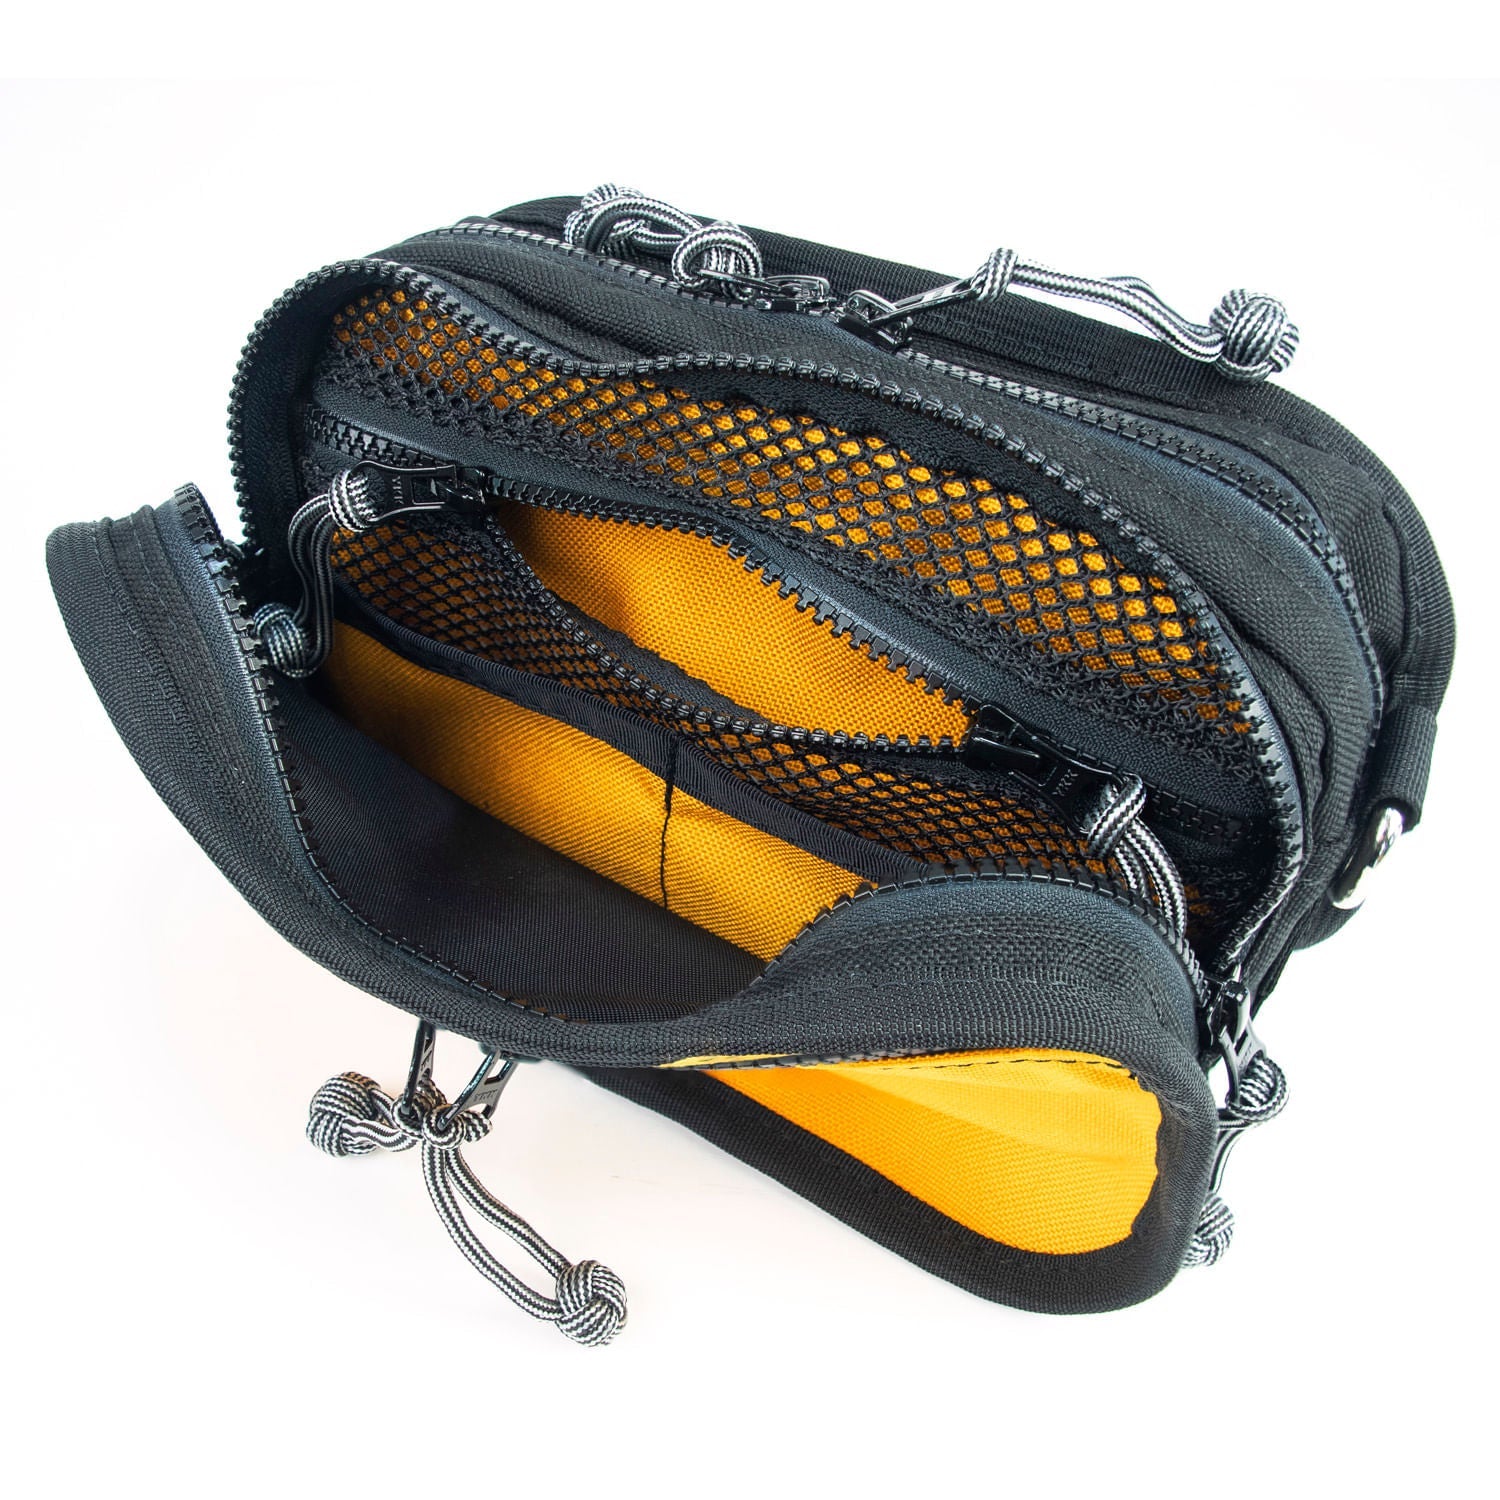 Open view of fanny pack shows internal pockets and divider.